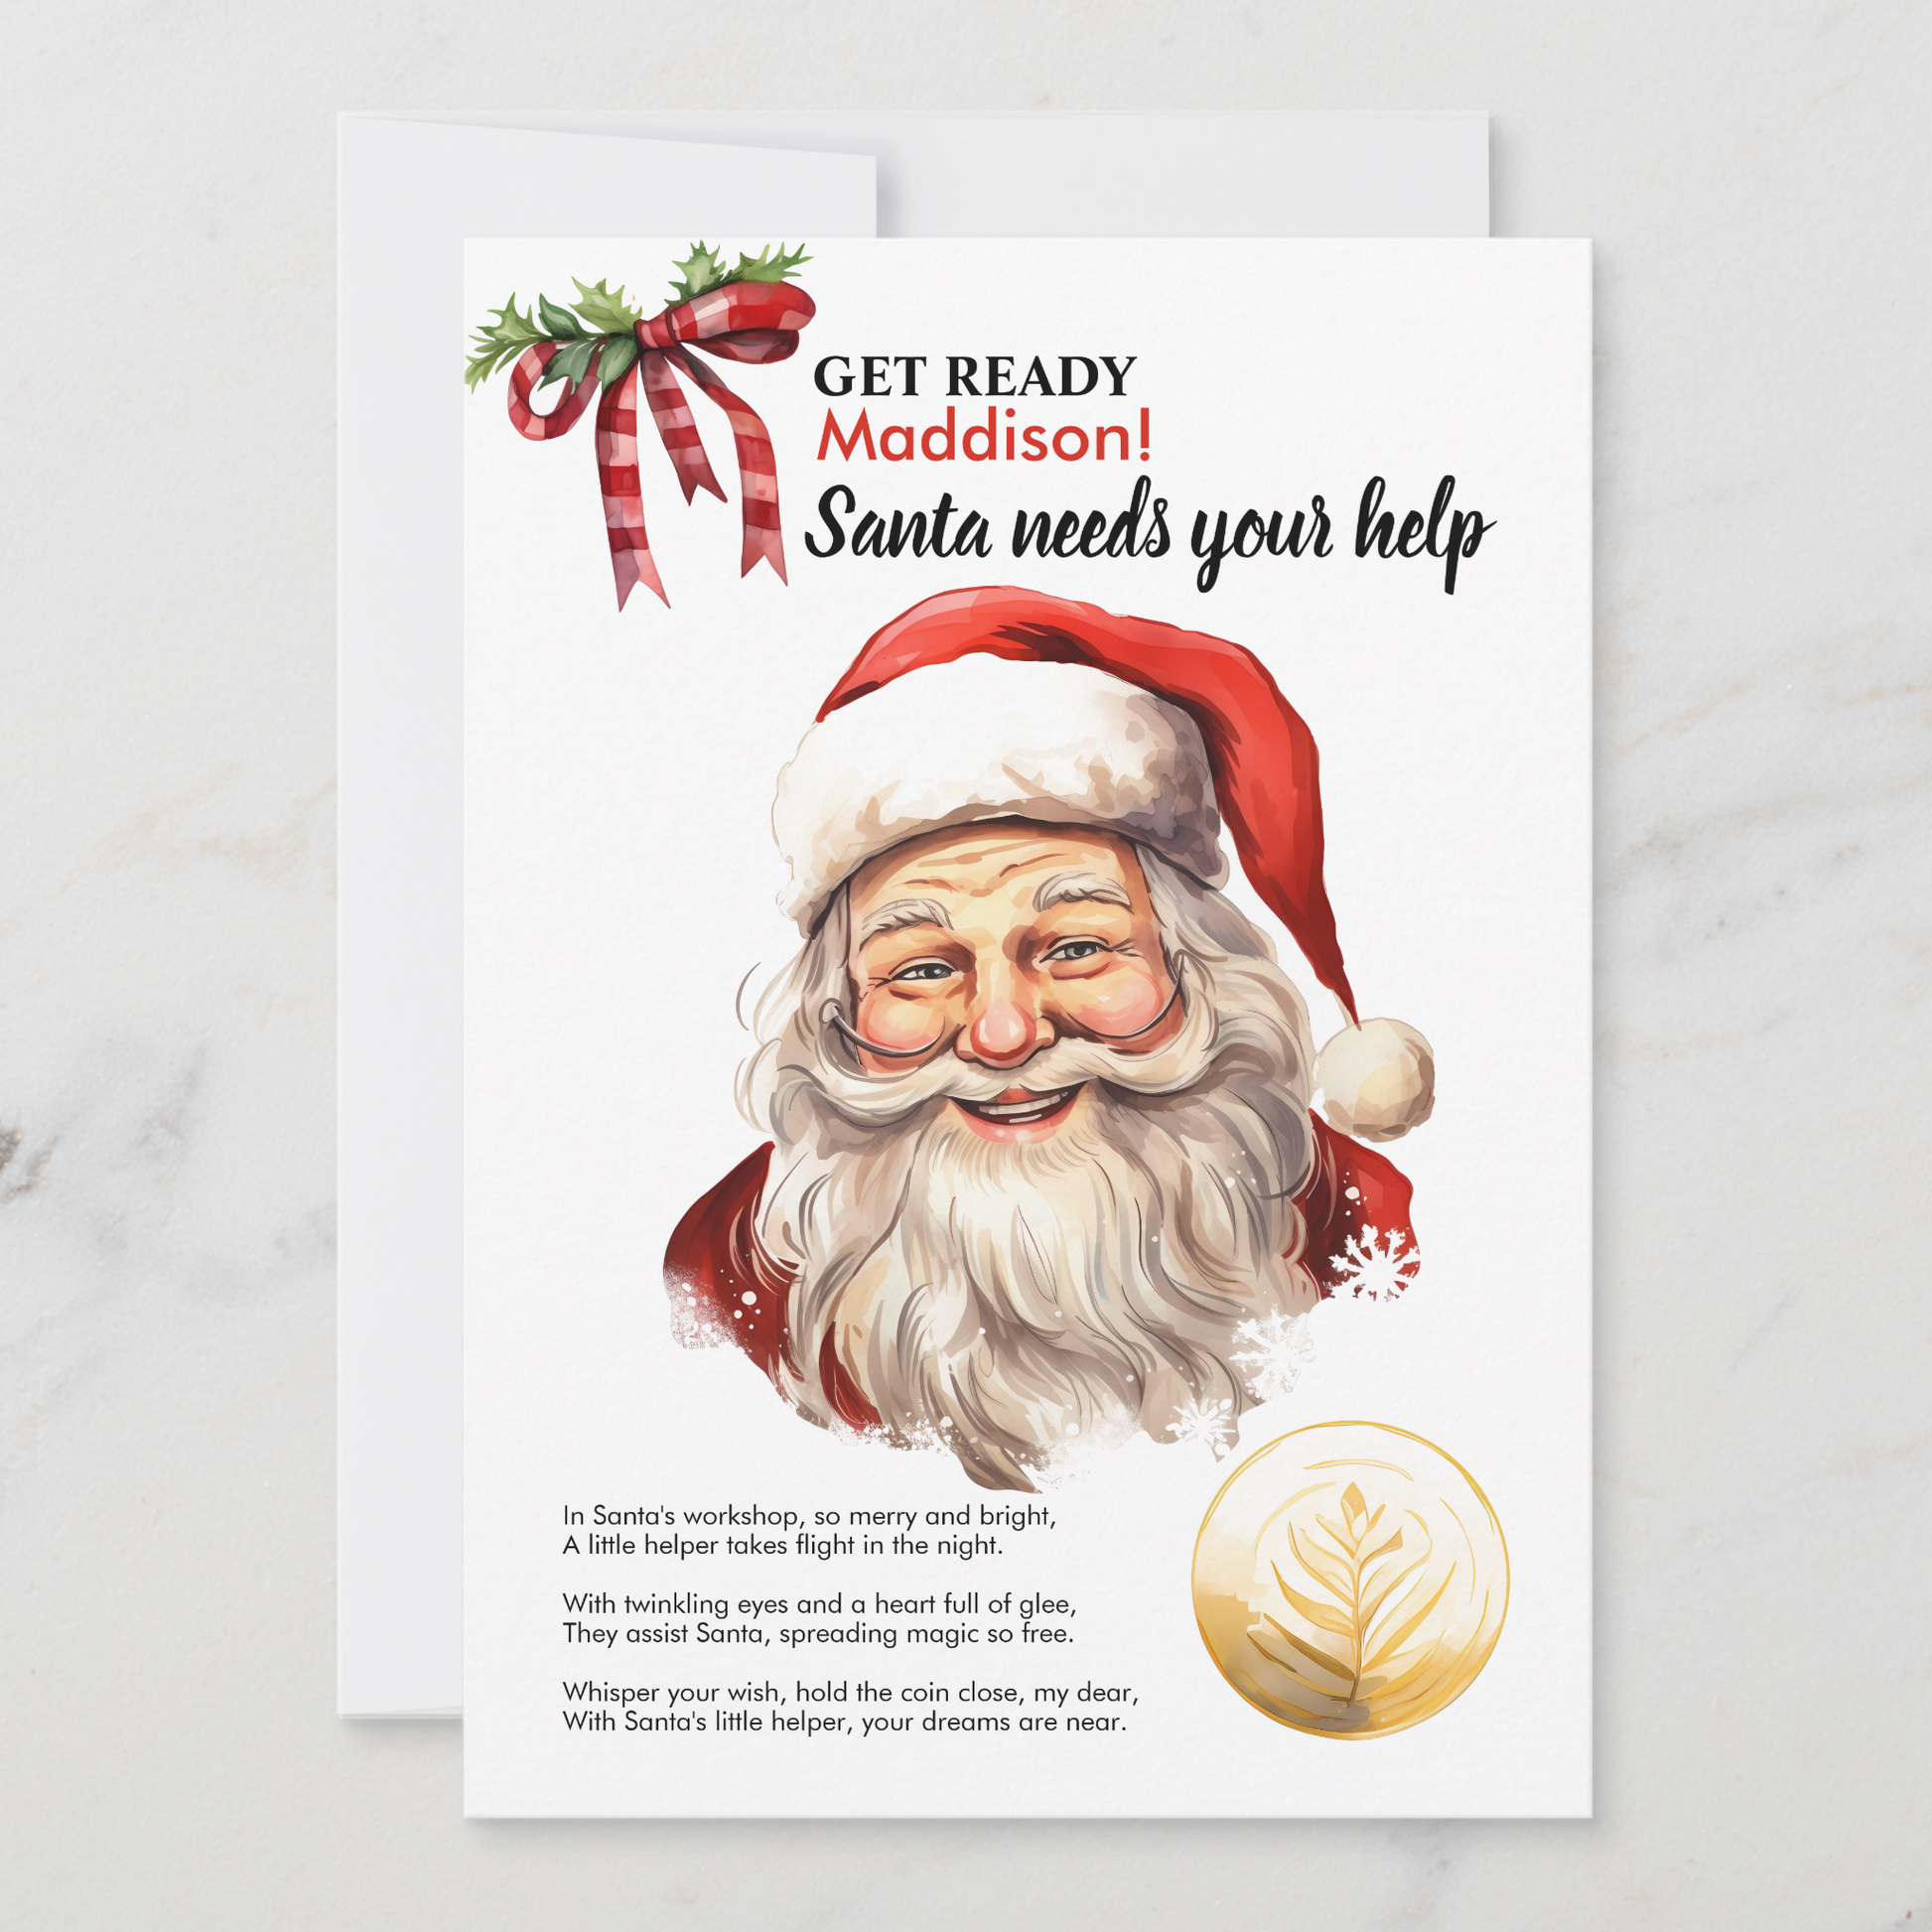 Personalized Santa Needs Your Help Red Magic Wish coin Card for kids christmas eve keepsake stocking gift idea for parents, easy instant digital download printable